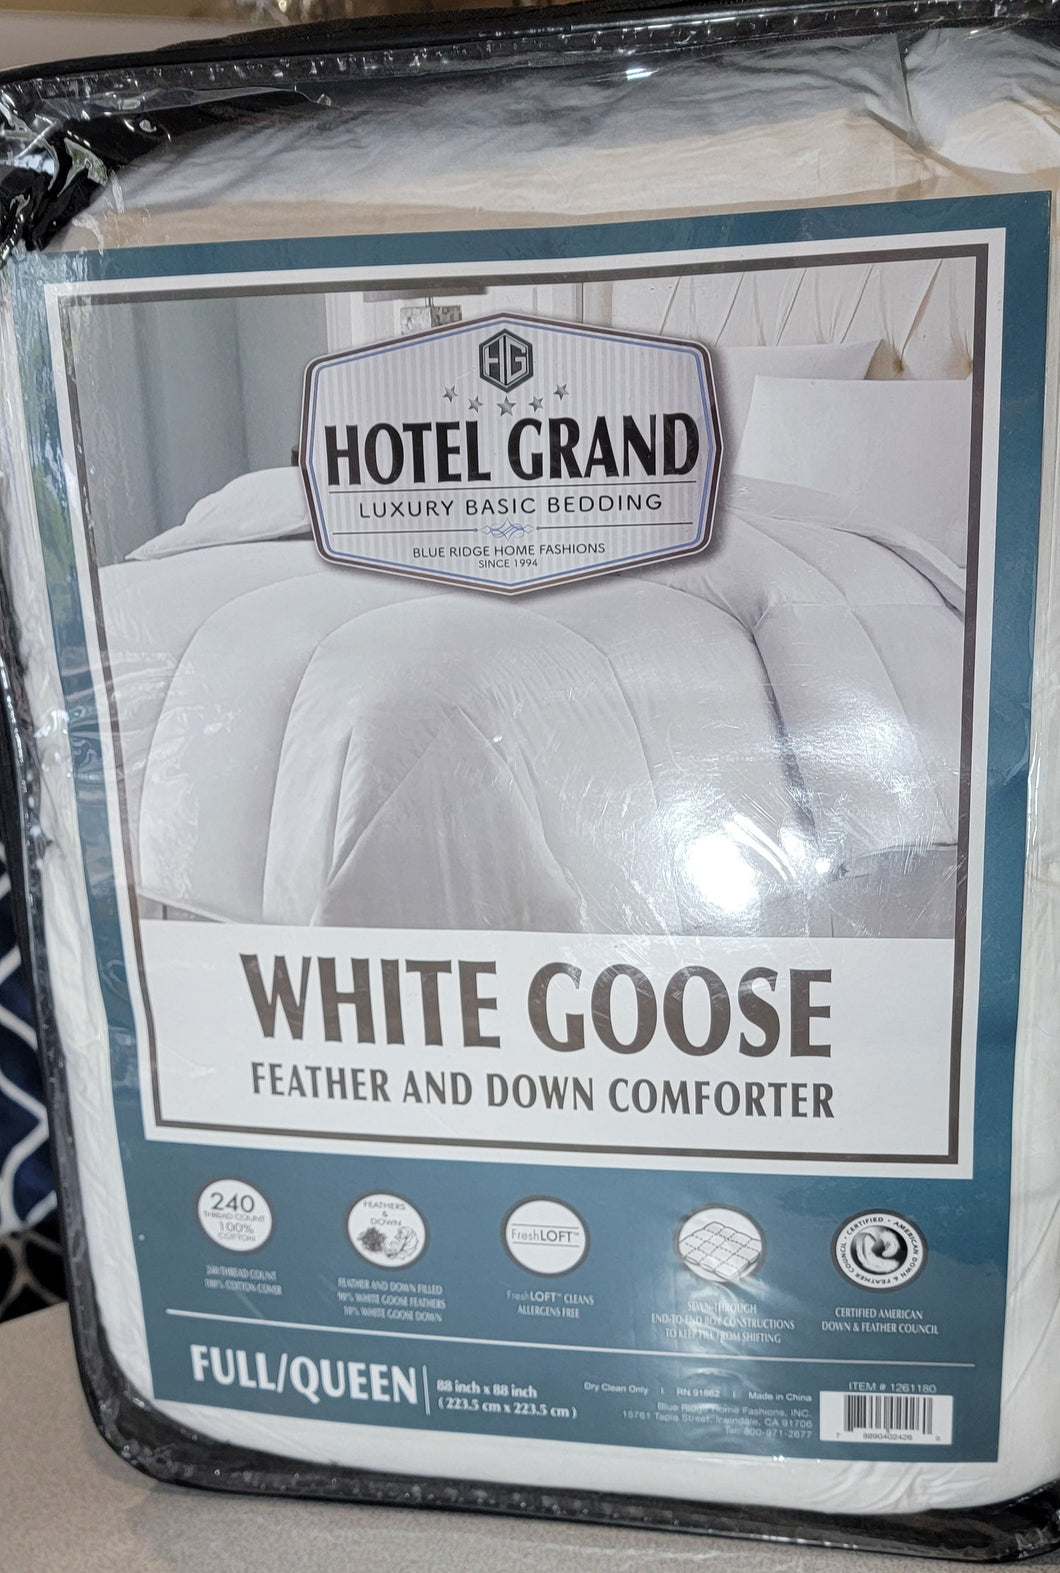 Hotel Grand, 240 TC Luxury White Goose Feather + Down Comforter Full/Queen